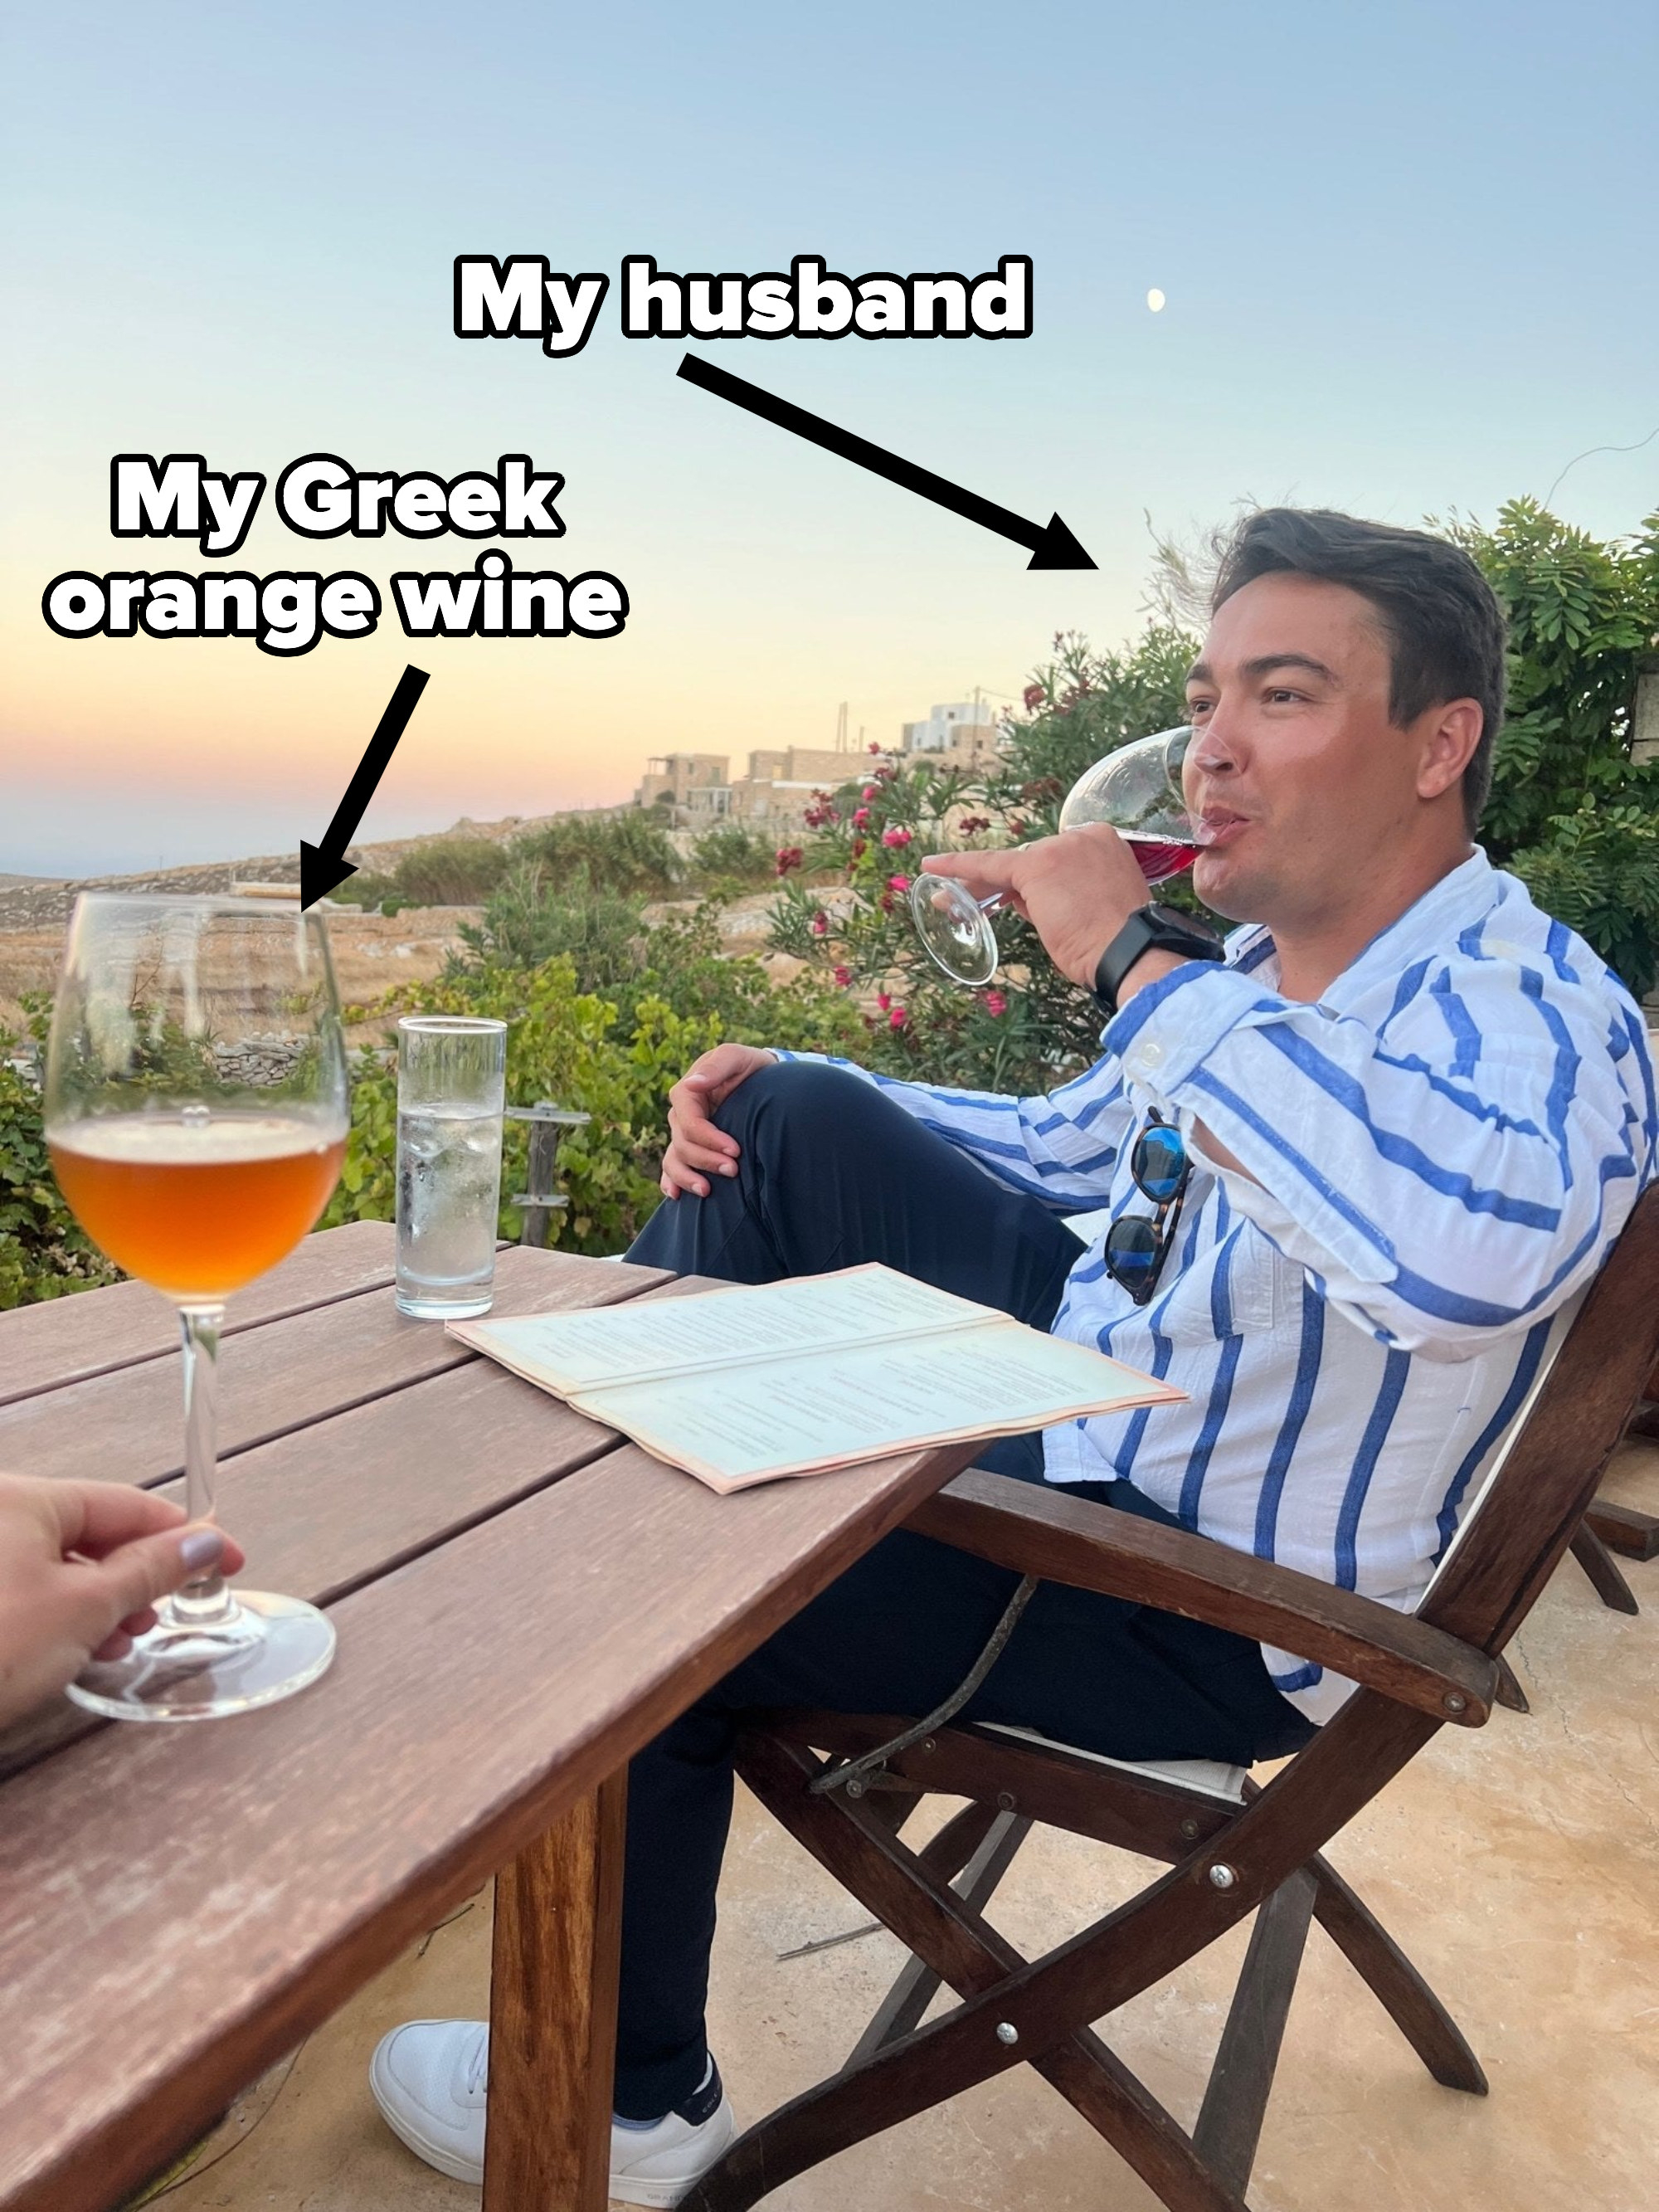 A man drinking a glass of wine.